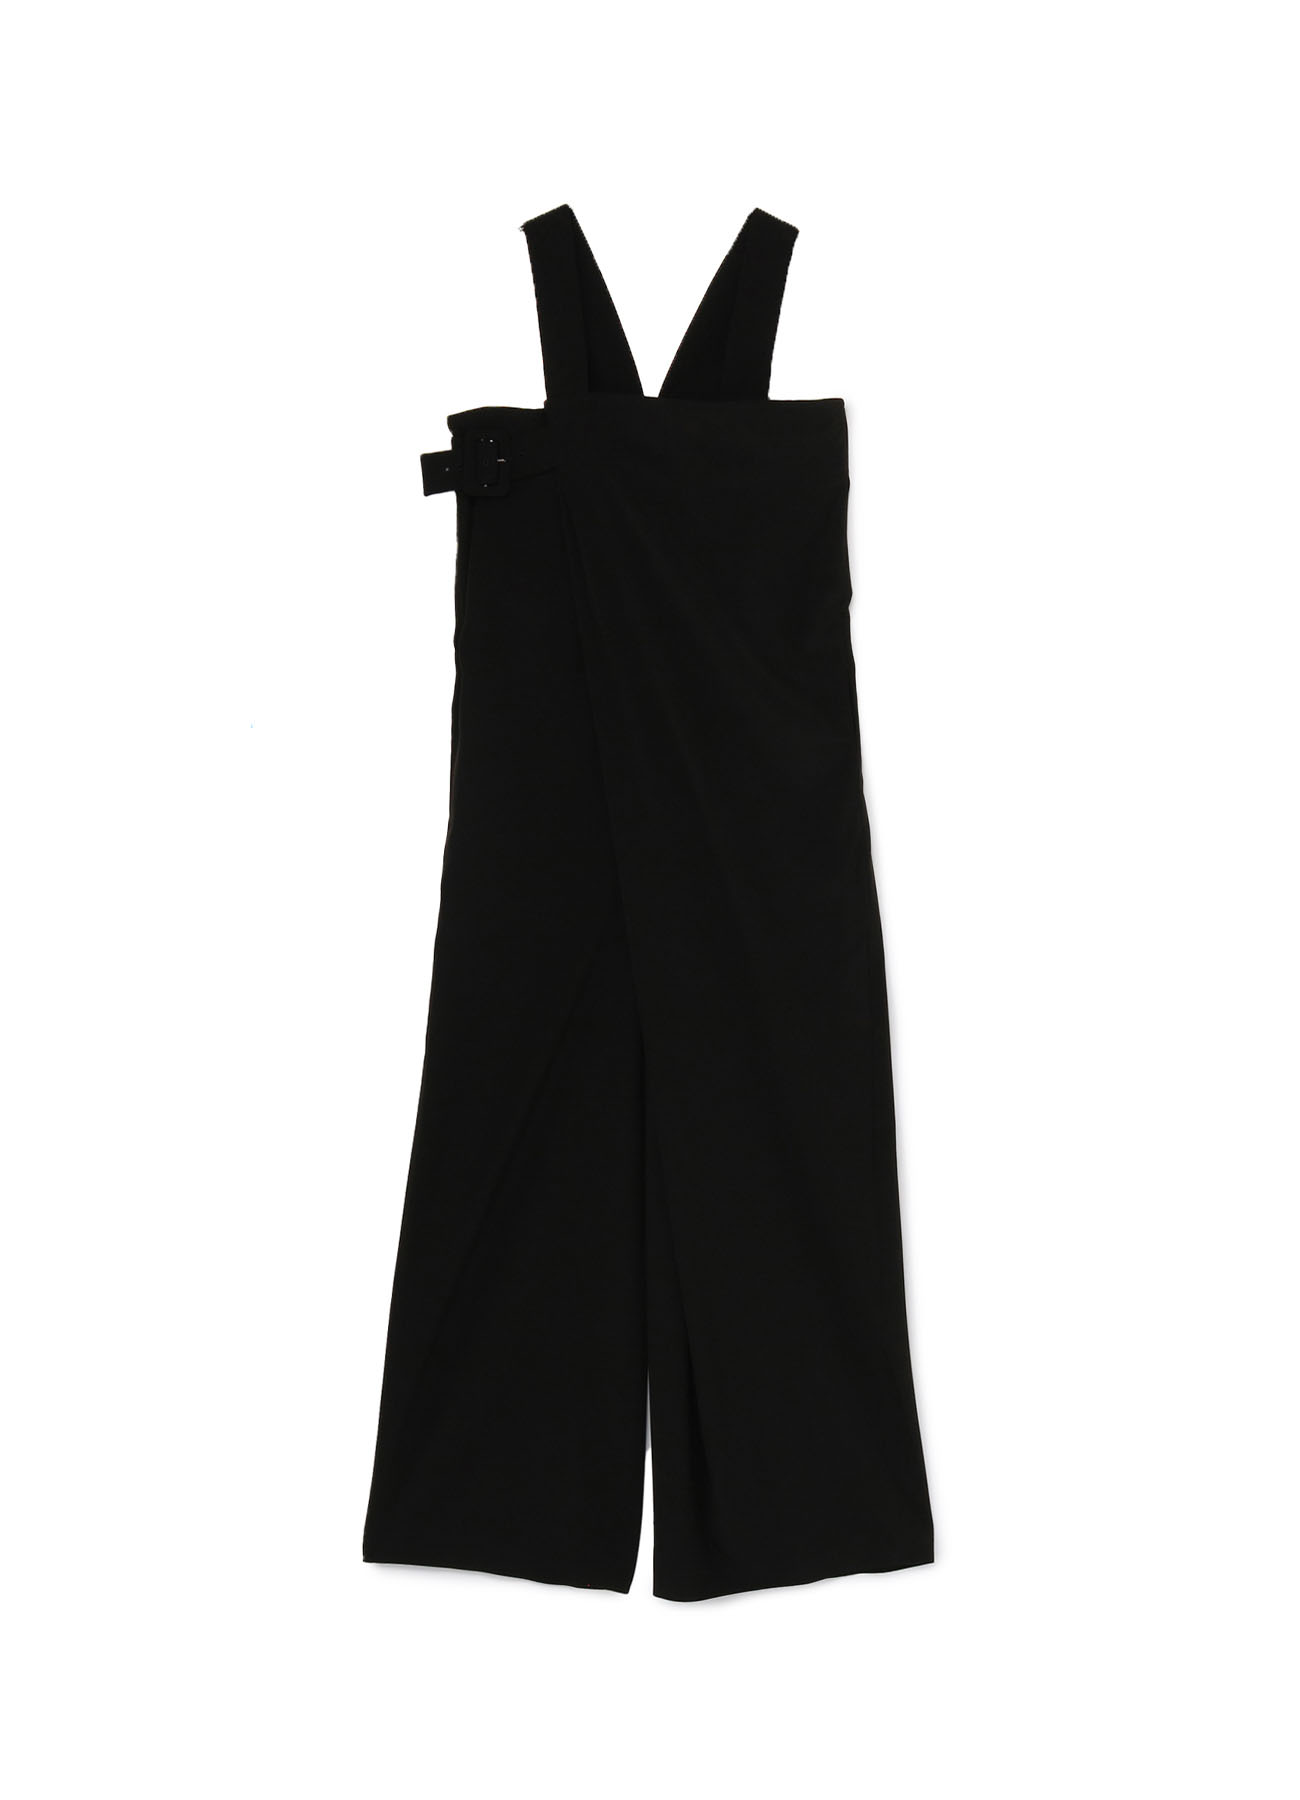 TRIACETATE POLYESTER TUSSAH WRAPPED OVERALL